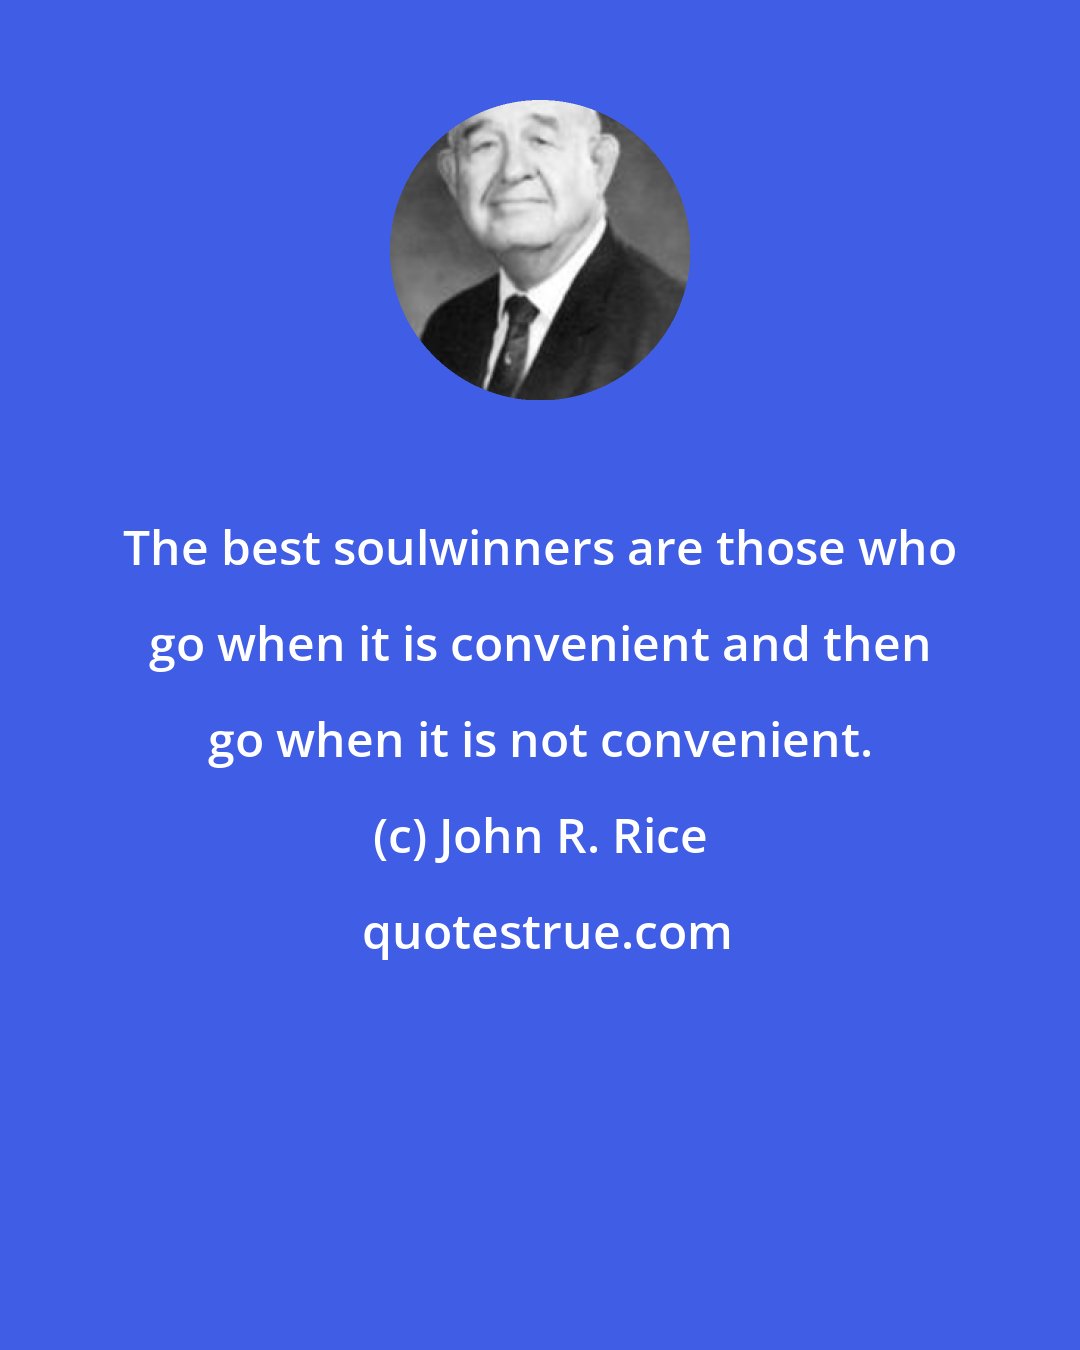 John R. Rice: The best soulwinners are those who go when it is convenient and then go when it is not convenient.